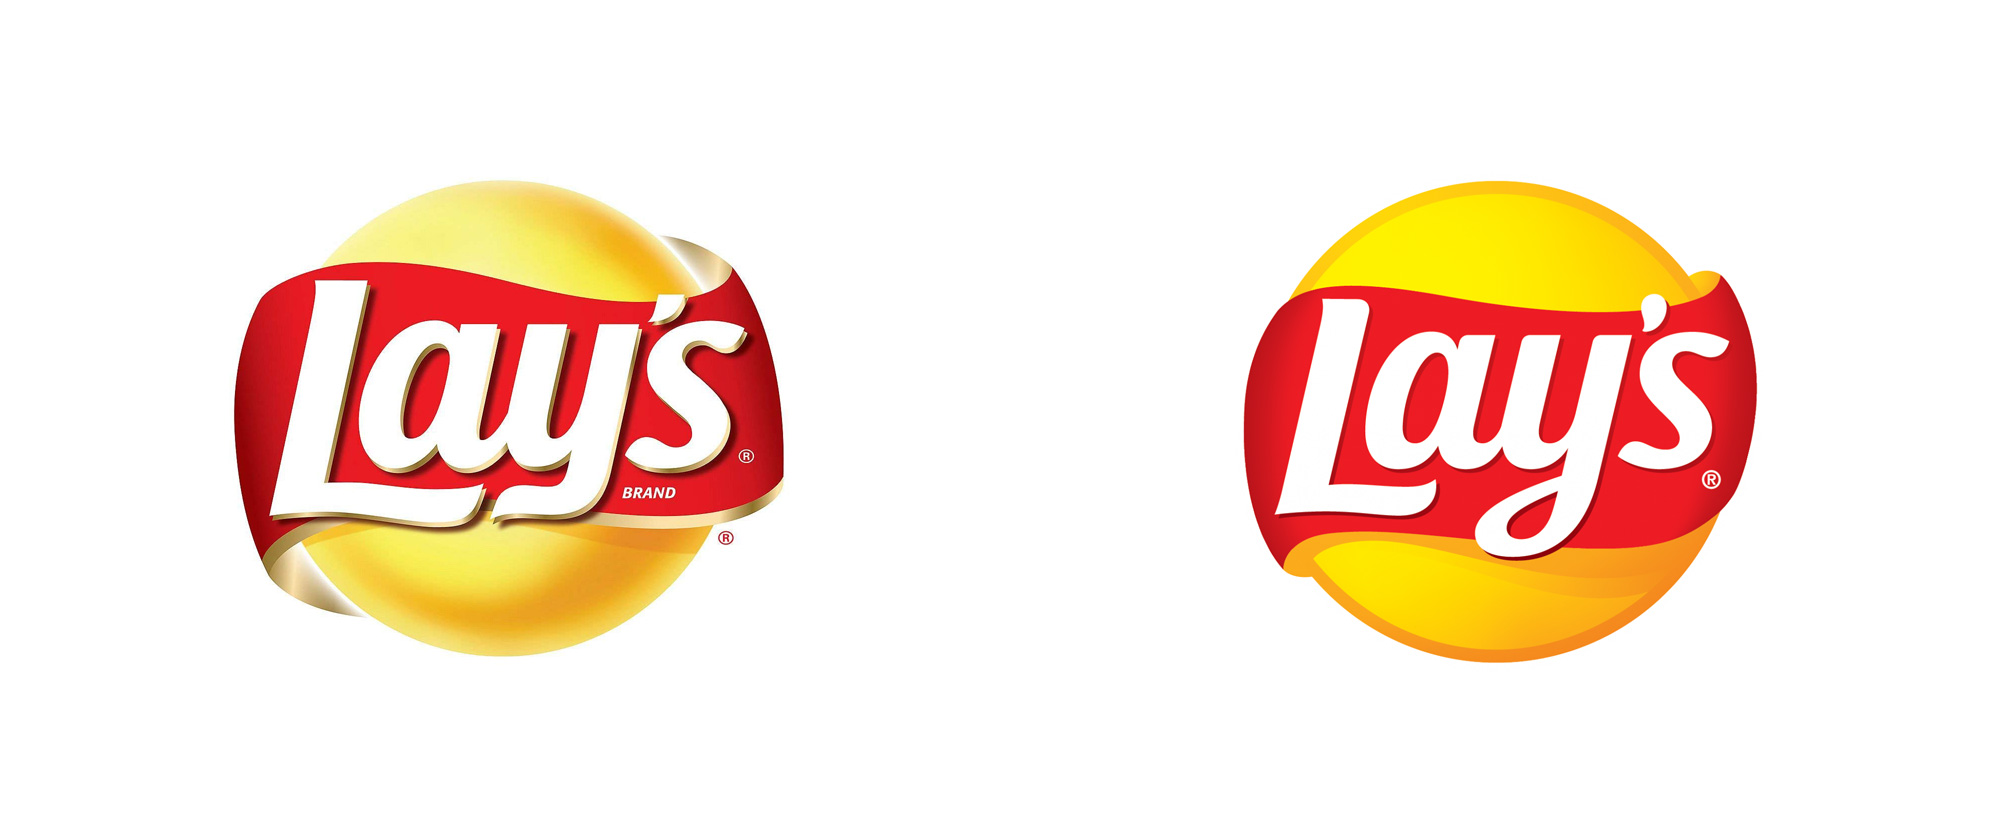 New Logo and Packaging for Lay’s